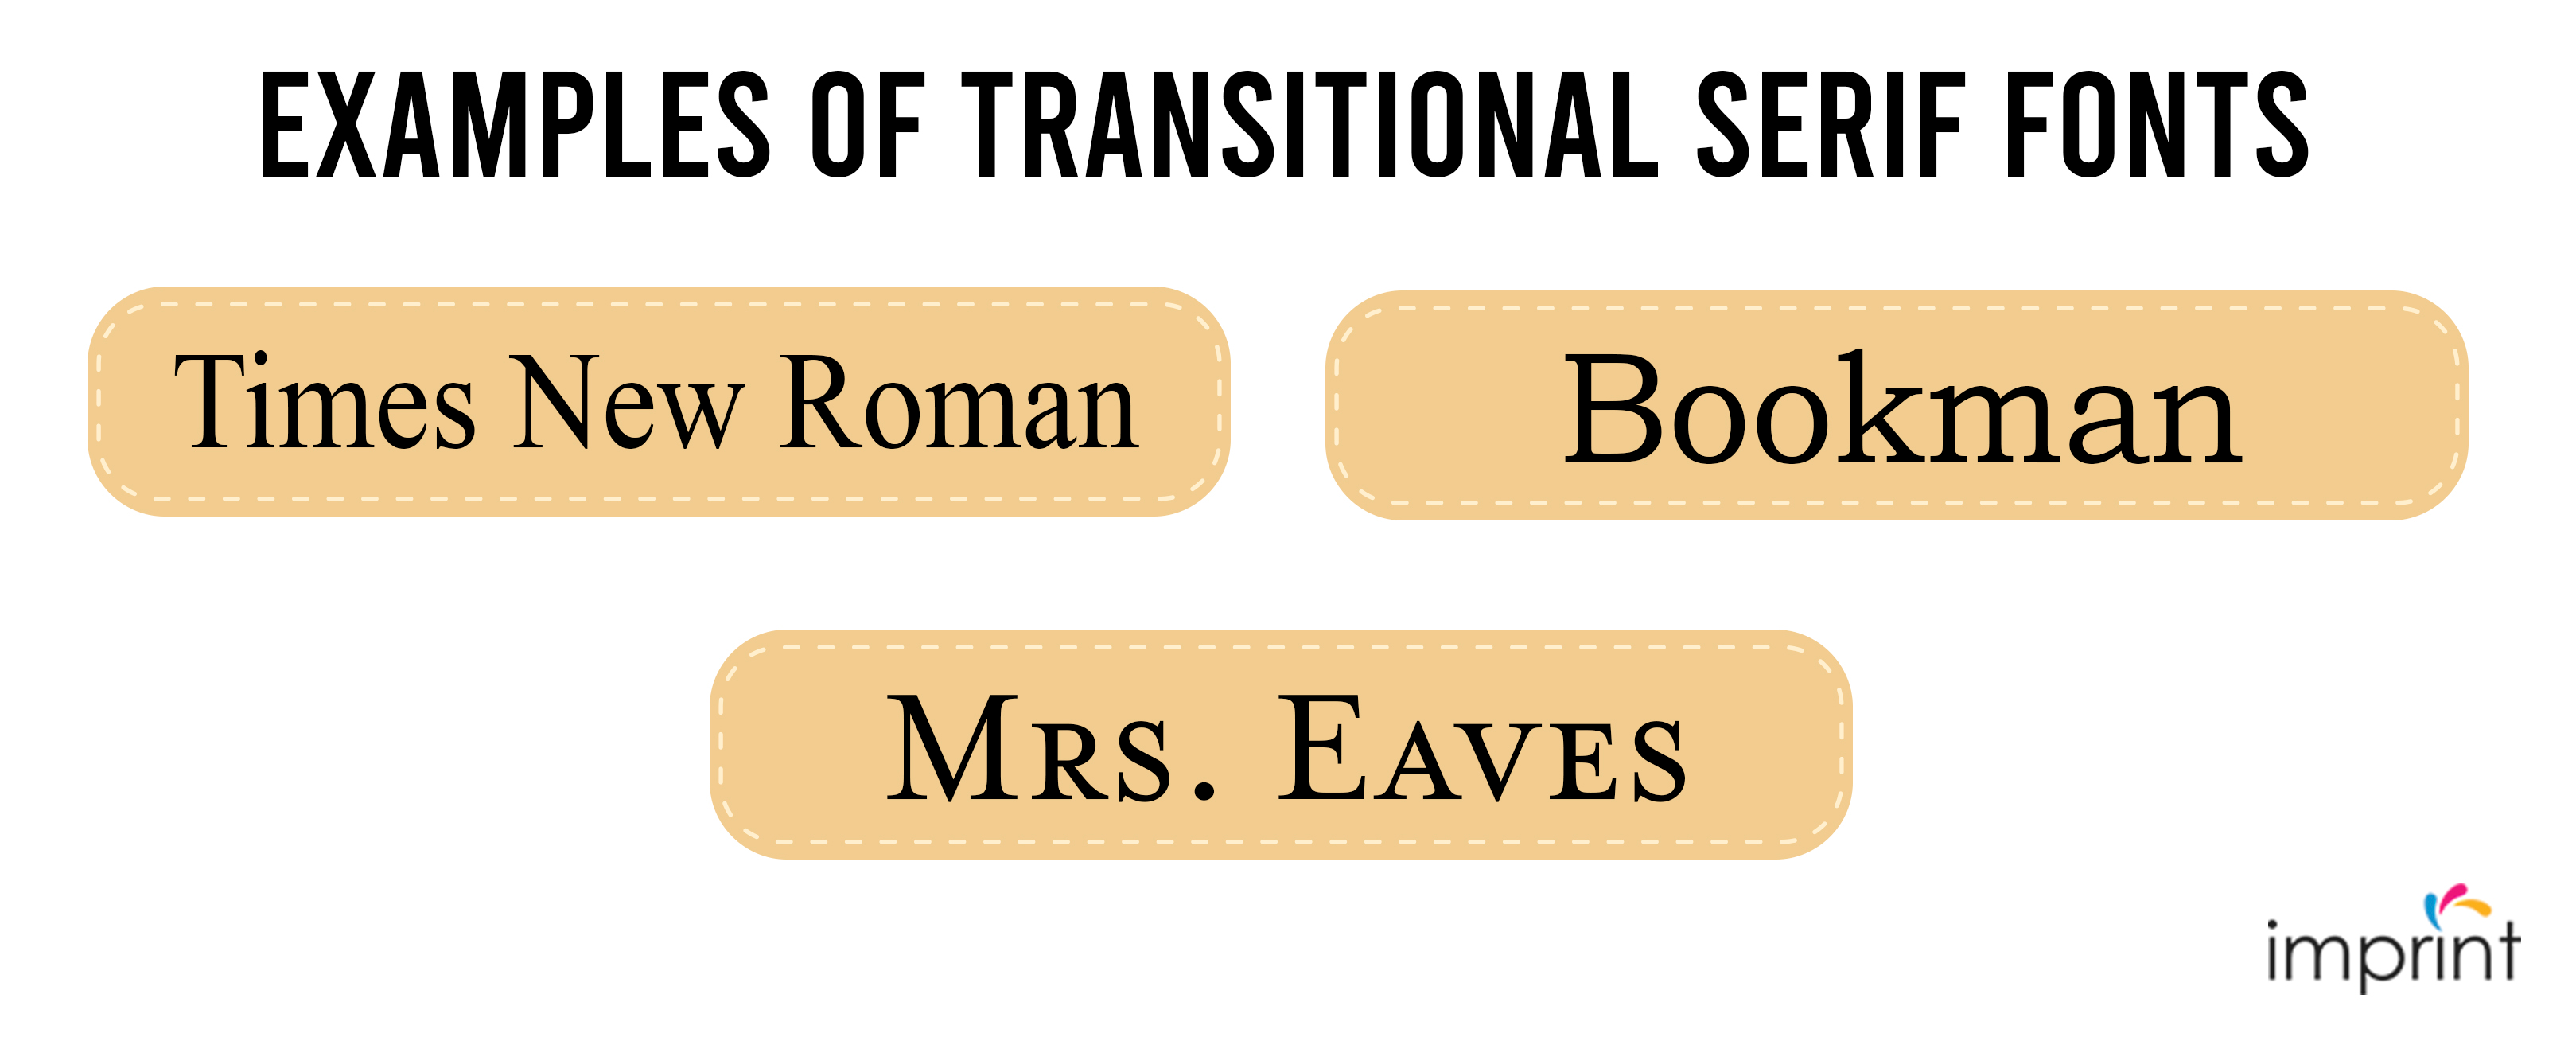 transitional-serif-fonts-examples